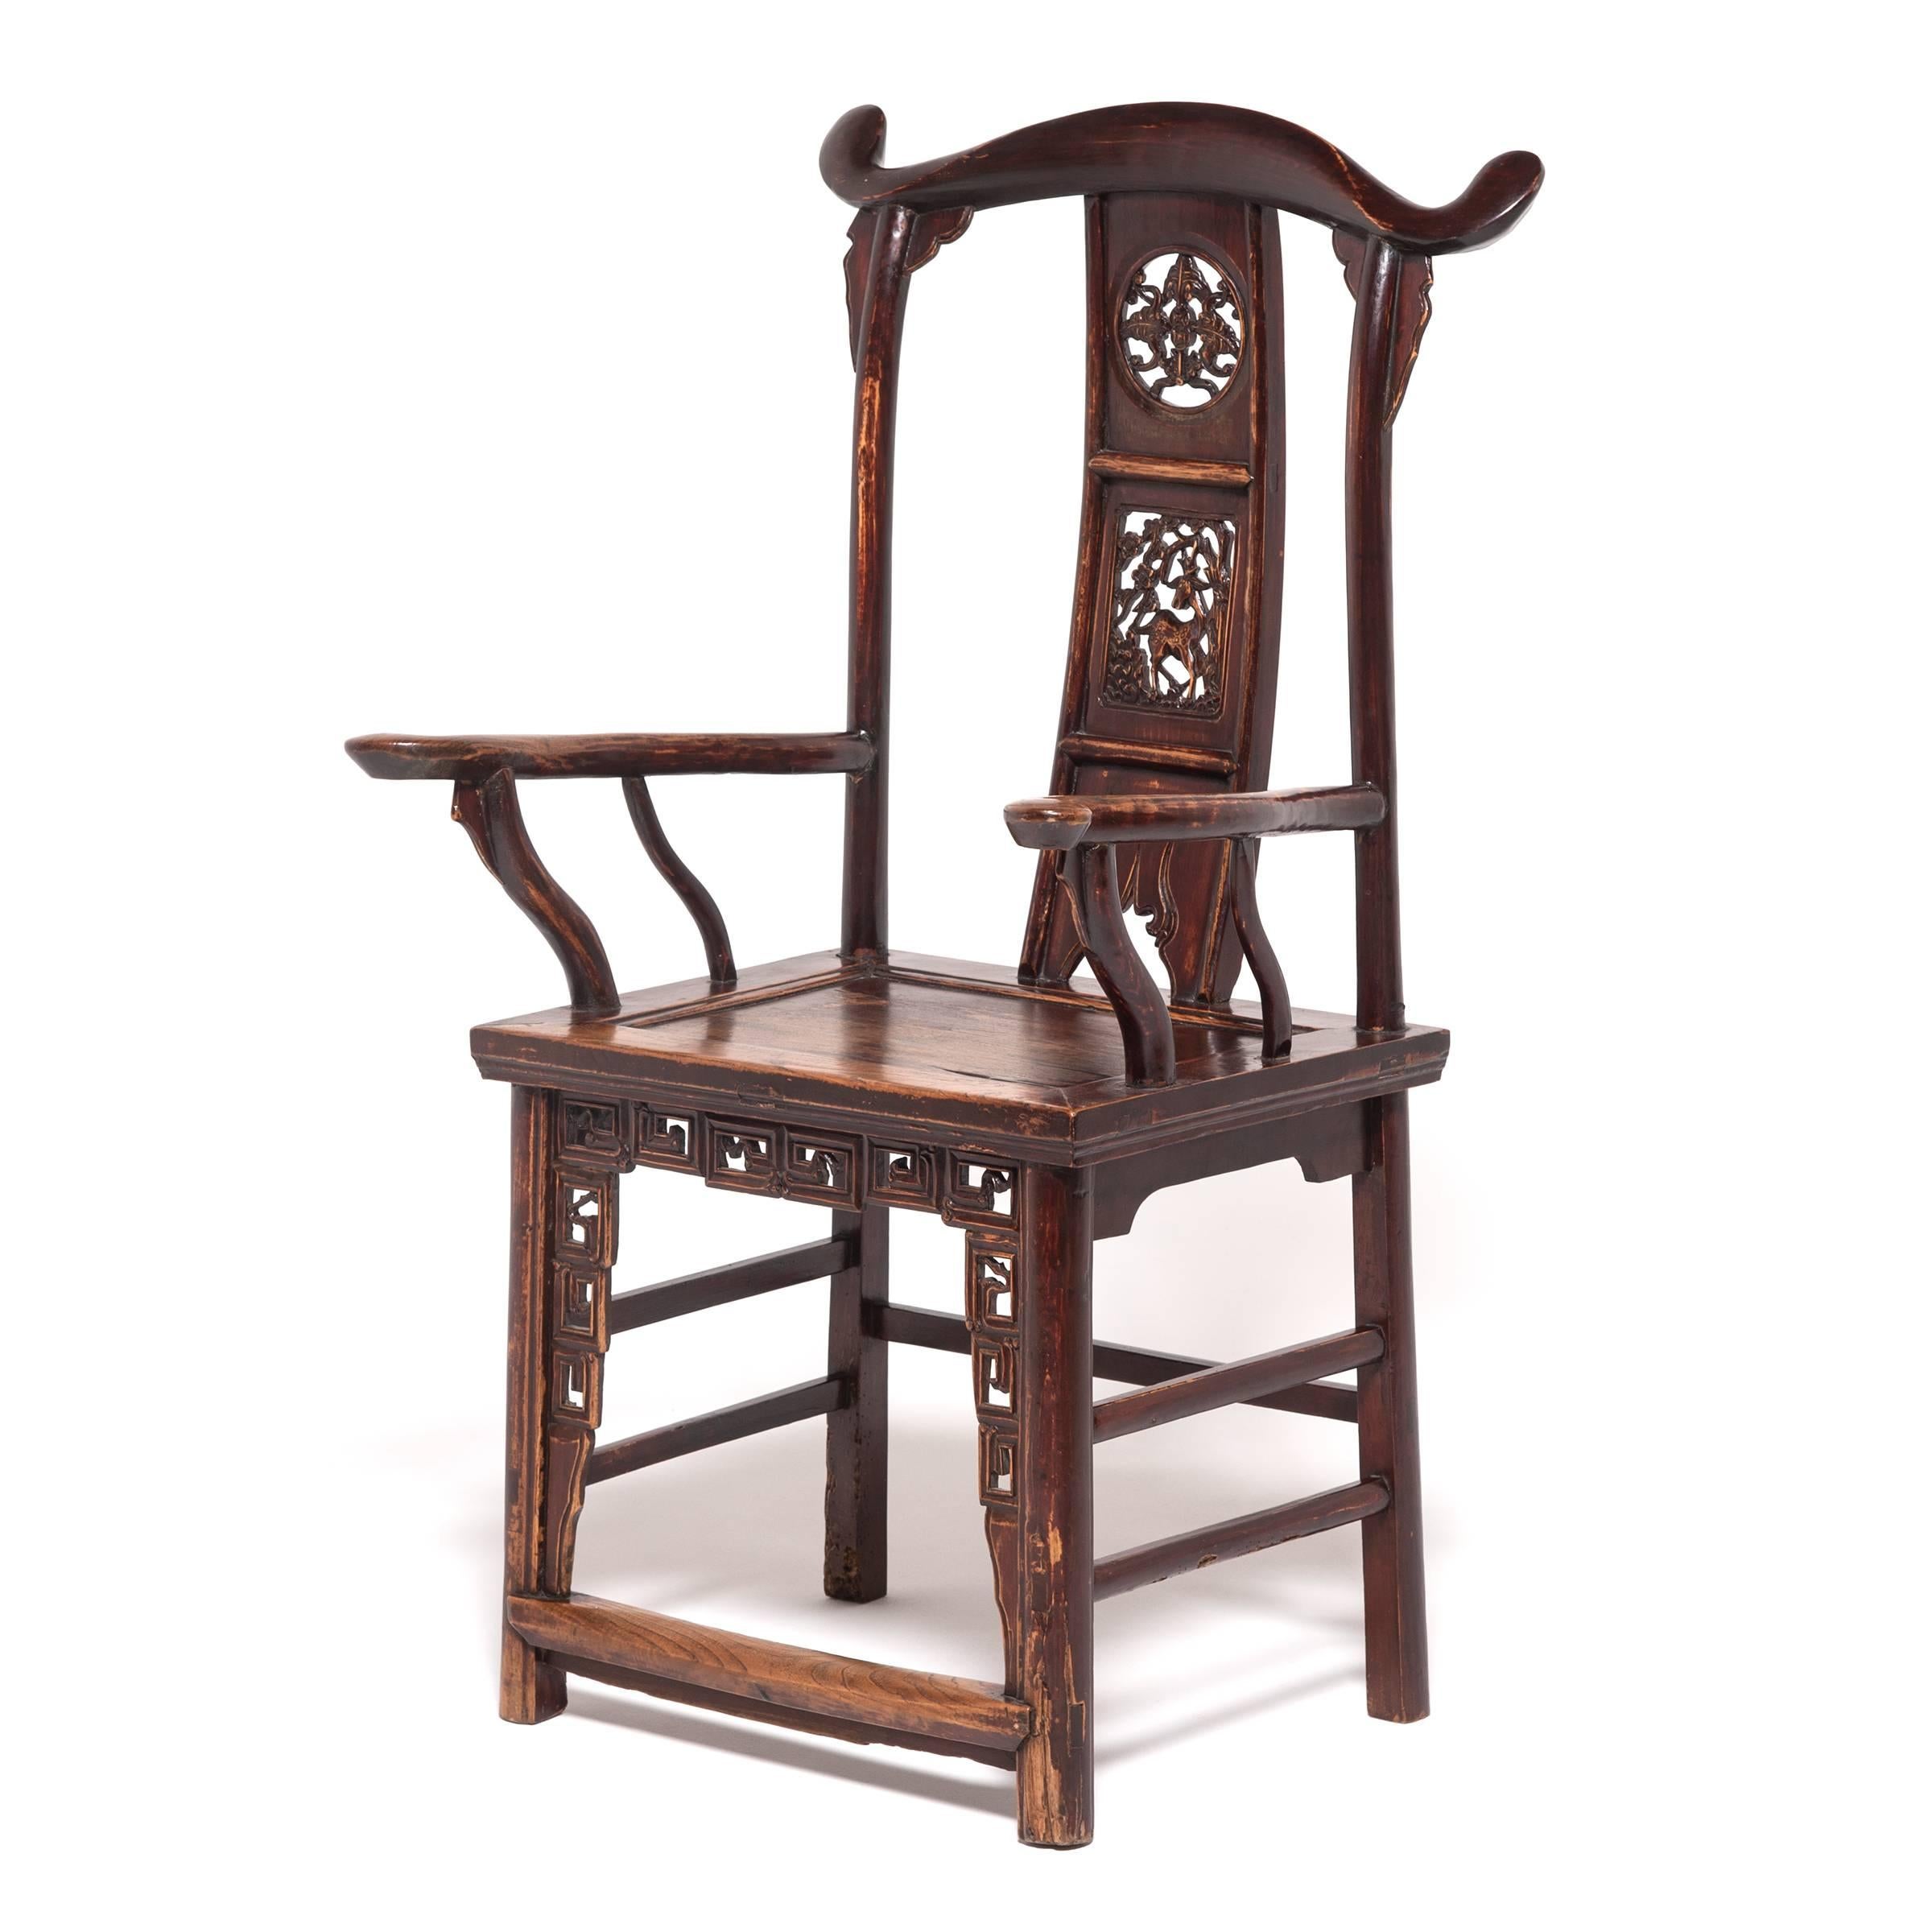 Pair of Chinese Tall Back Chairs with Auspicious Deer Medallions, c. 1850 6